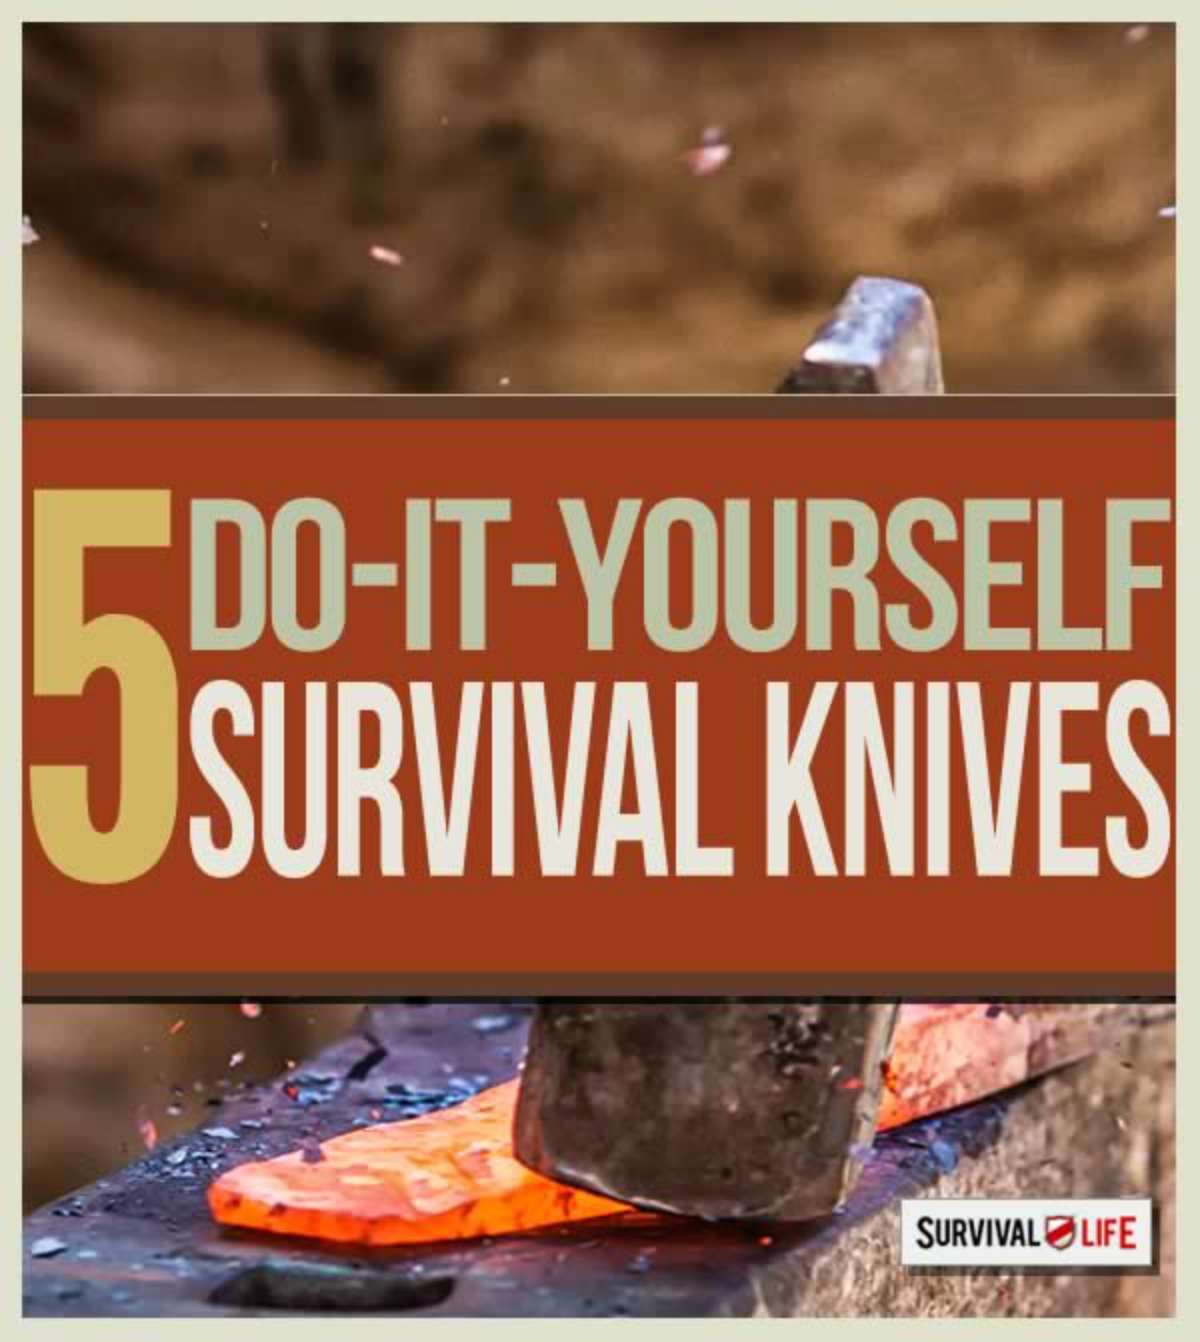 DIY Survival Knives | "Old World" Primitive Survival Skills You'll WISH You Knew Before SHTF